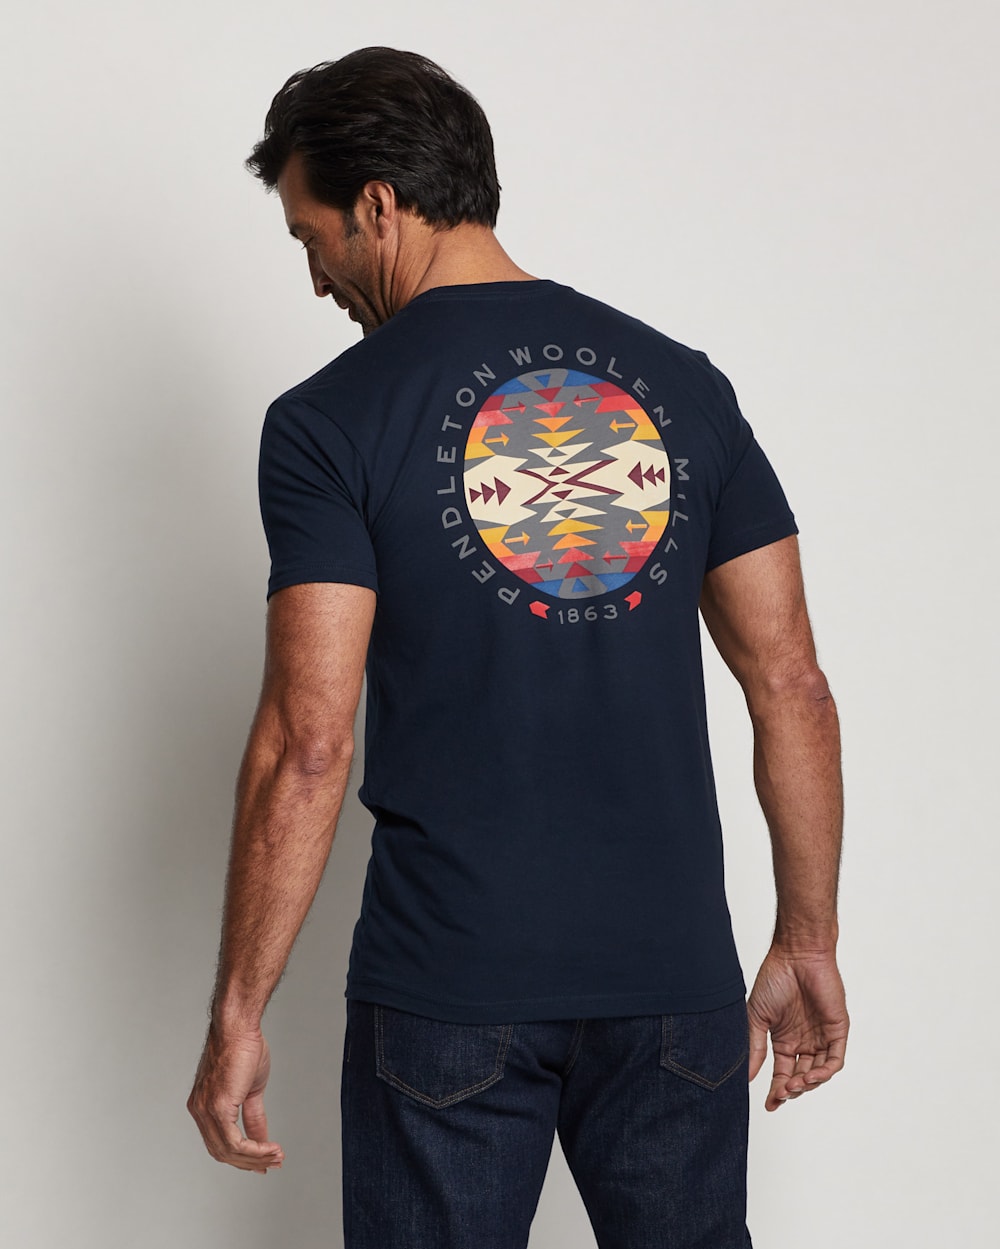 ALTERNATE VIEW OF MEN'S TUCSON GRAPHIC TEE IN NAVY/MULTI image number 2